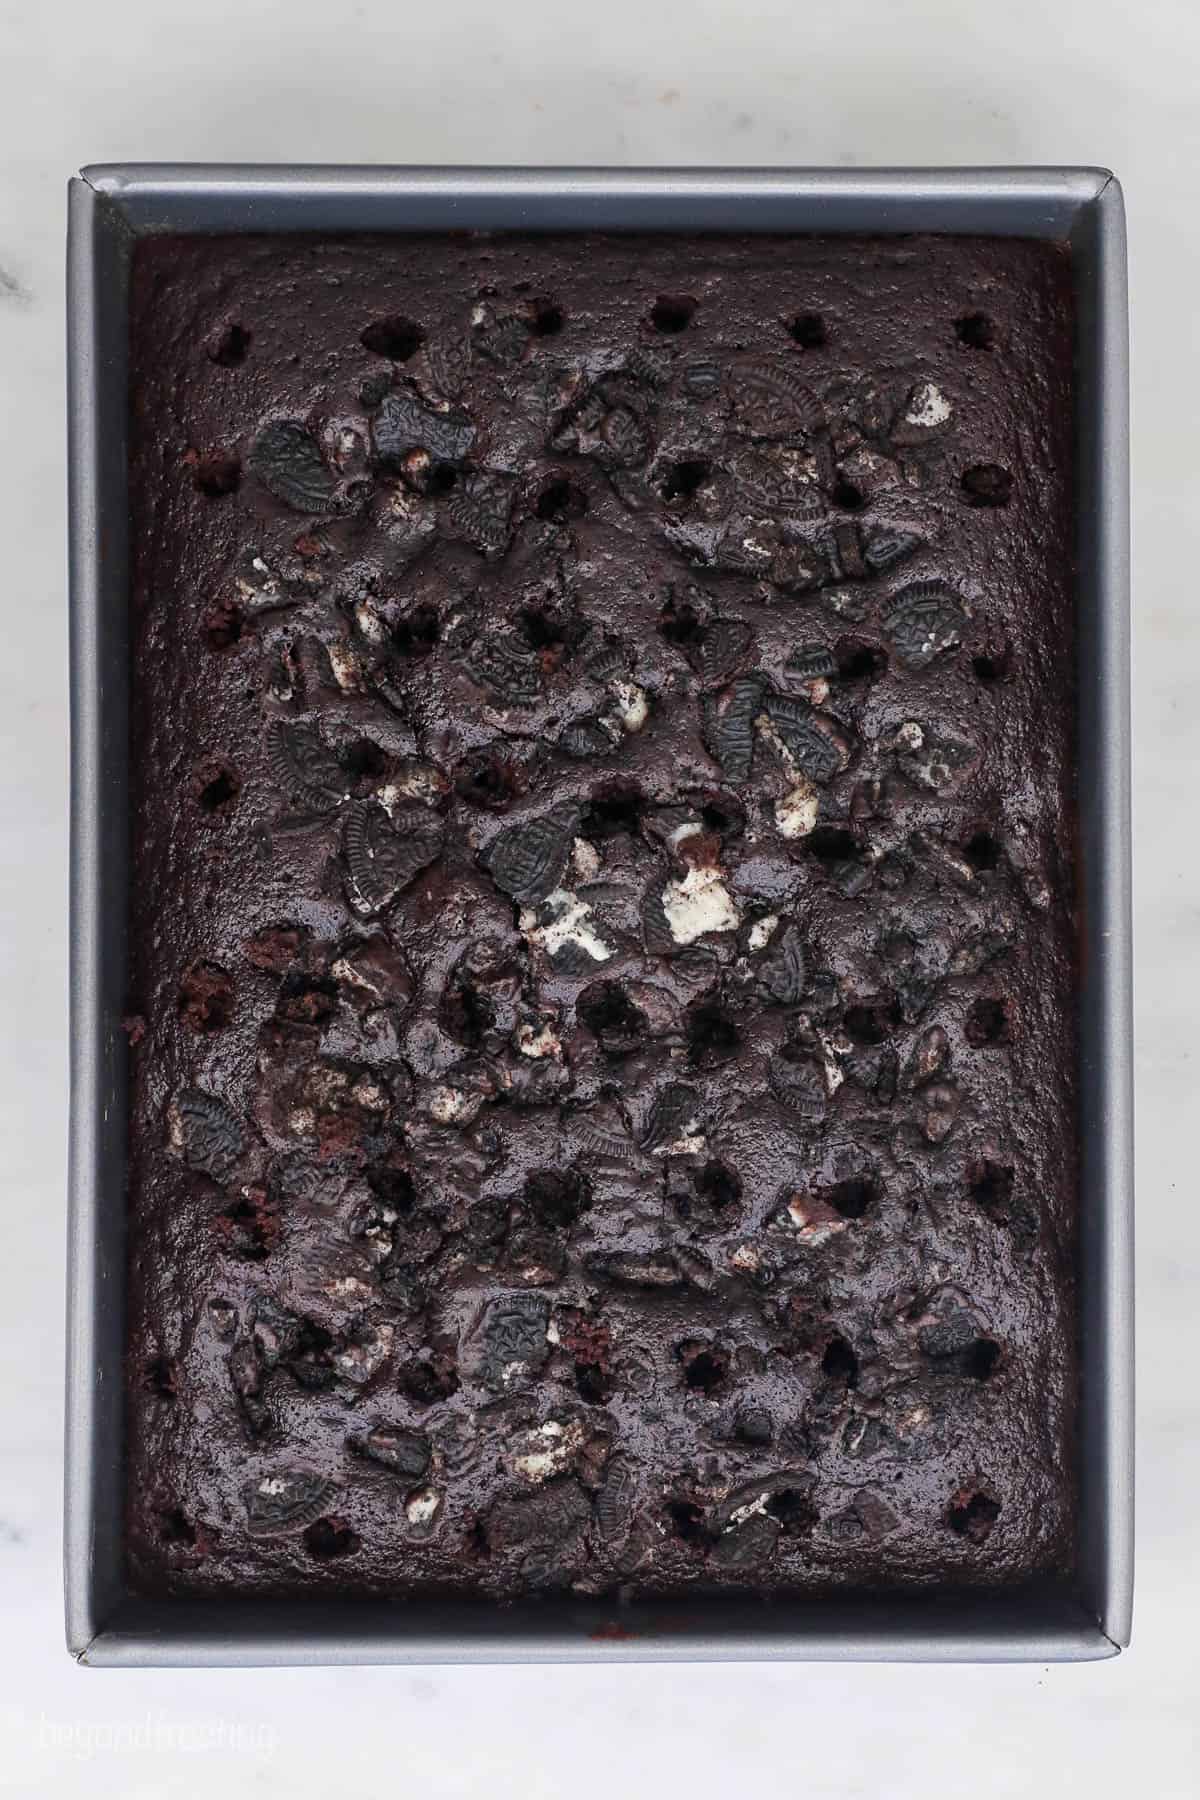 baked chocolate cake with holes poked on top